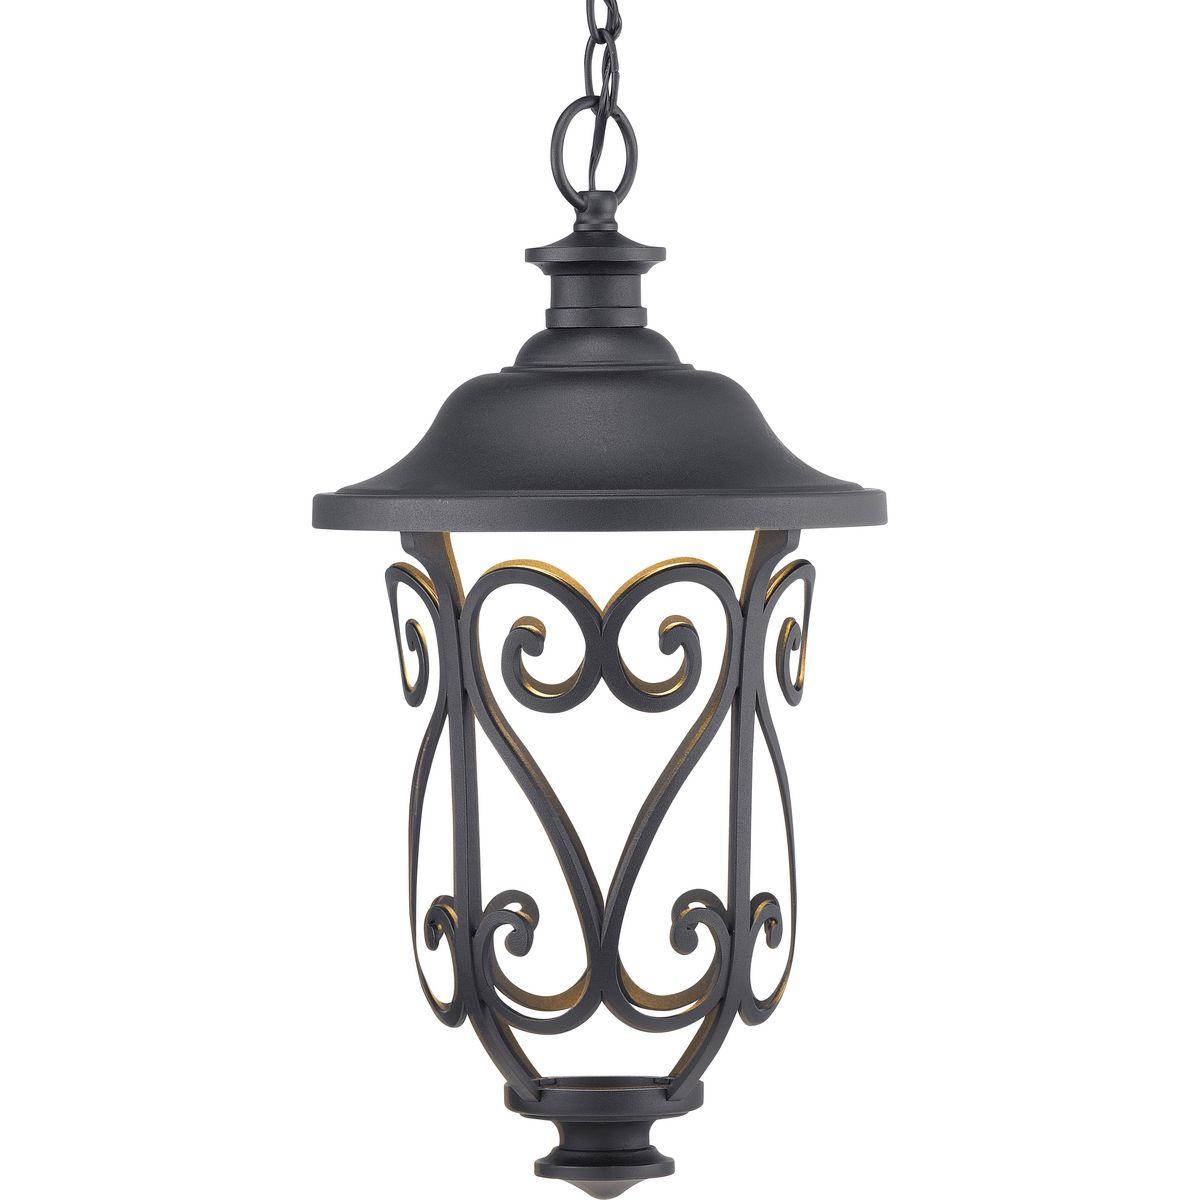 Hubbell P550037-031-30 The Leawood LED Collection hanging lantern provides delicate scrollwork with dramatic shadow patterns in a modern form. Intricate die cast aluminum construction in classic Black finish. A taller design accommodates the larger scale commonly seen in today’